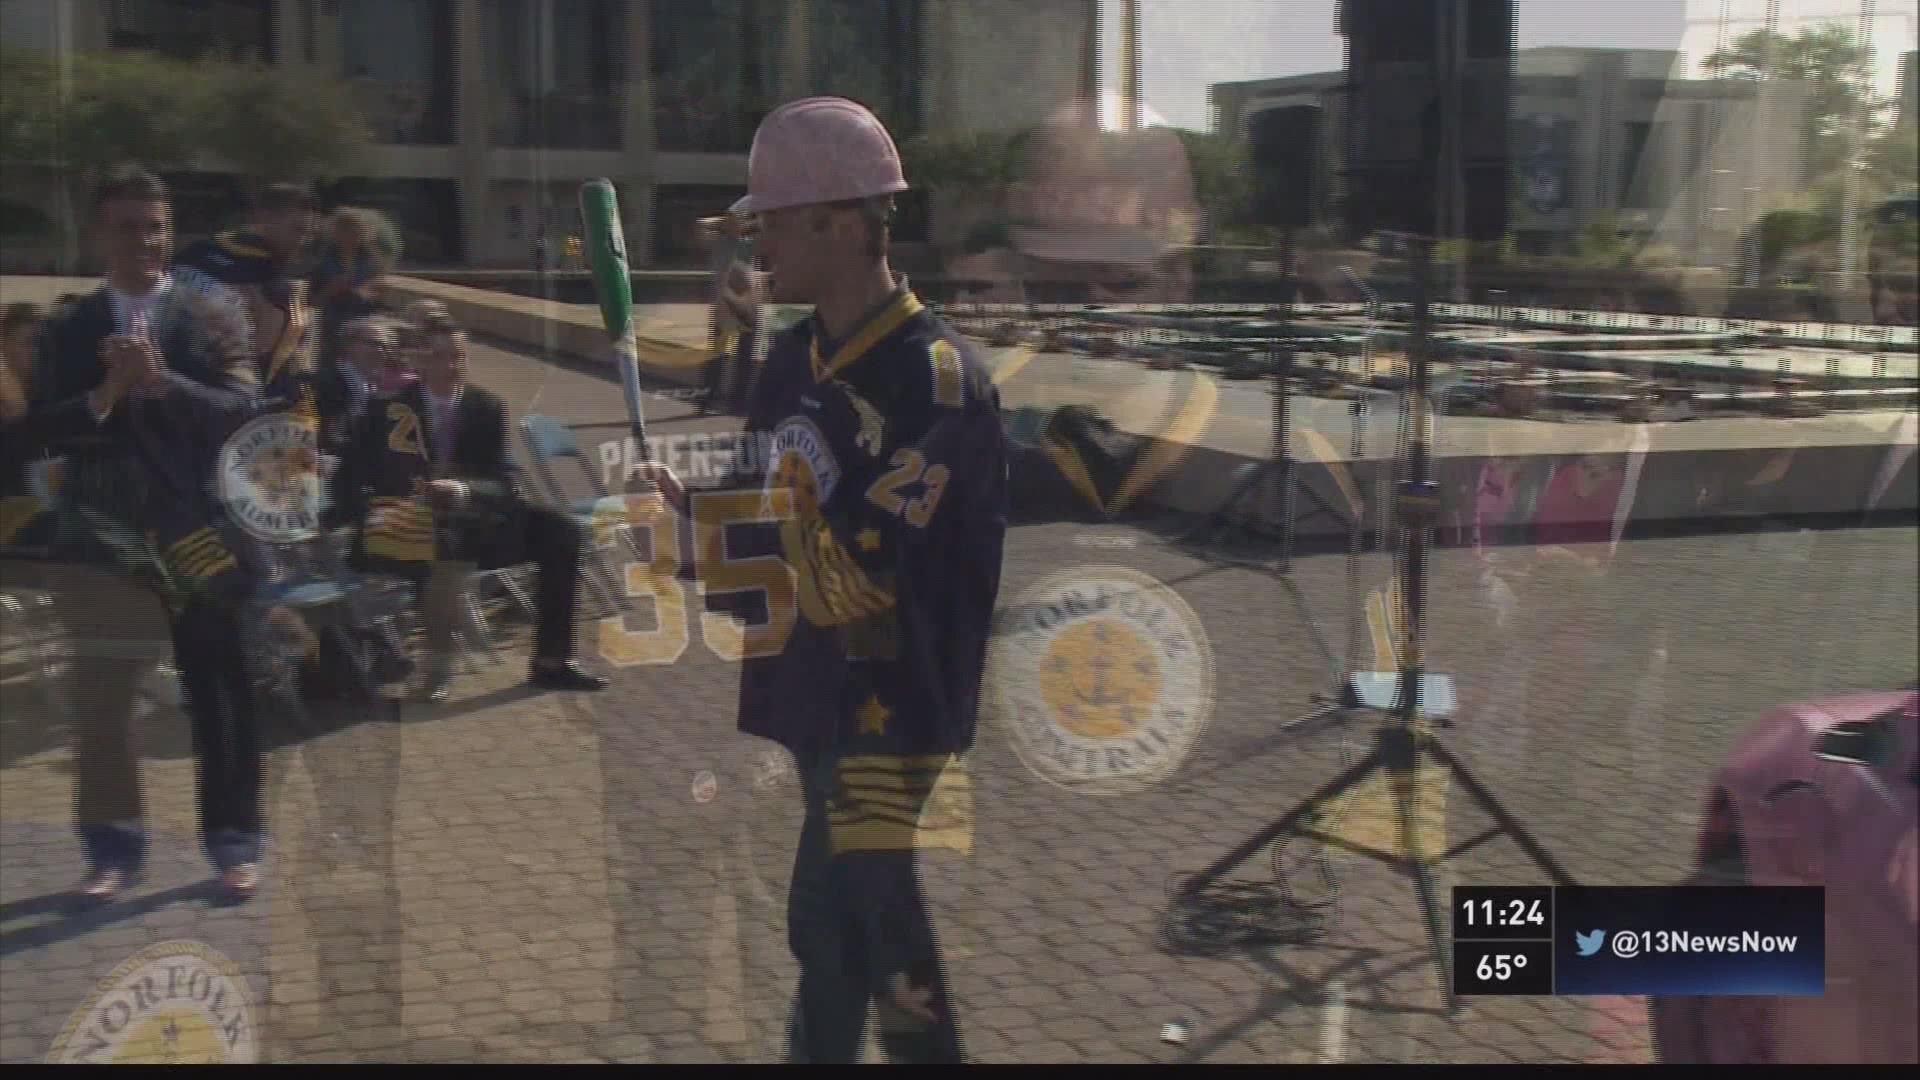 The Norfolk Admirals kicking off "Pink In The Rink" week by smashing a pink car at Scope on Tuesday. It's part of Breast Awareness Month in Hampton Roads.